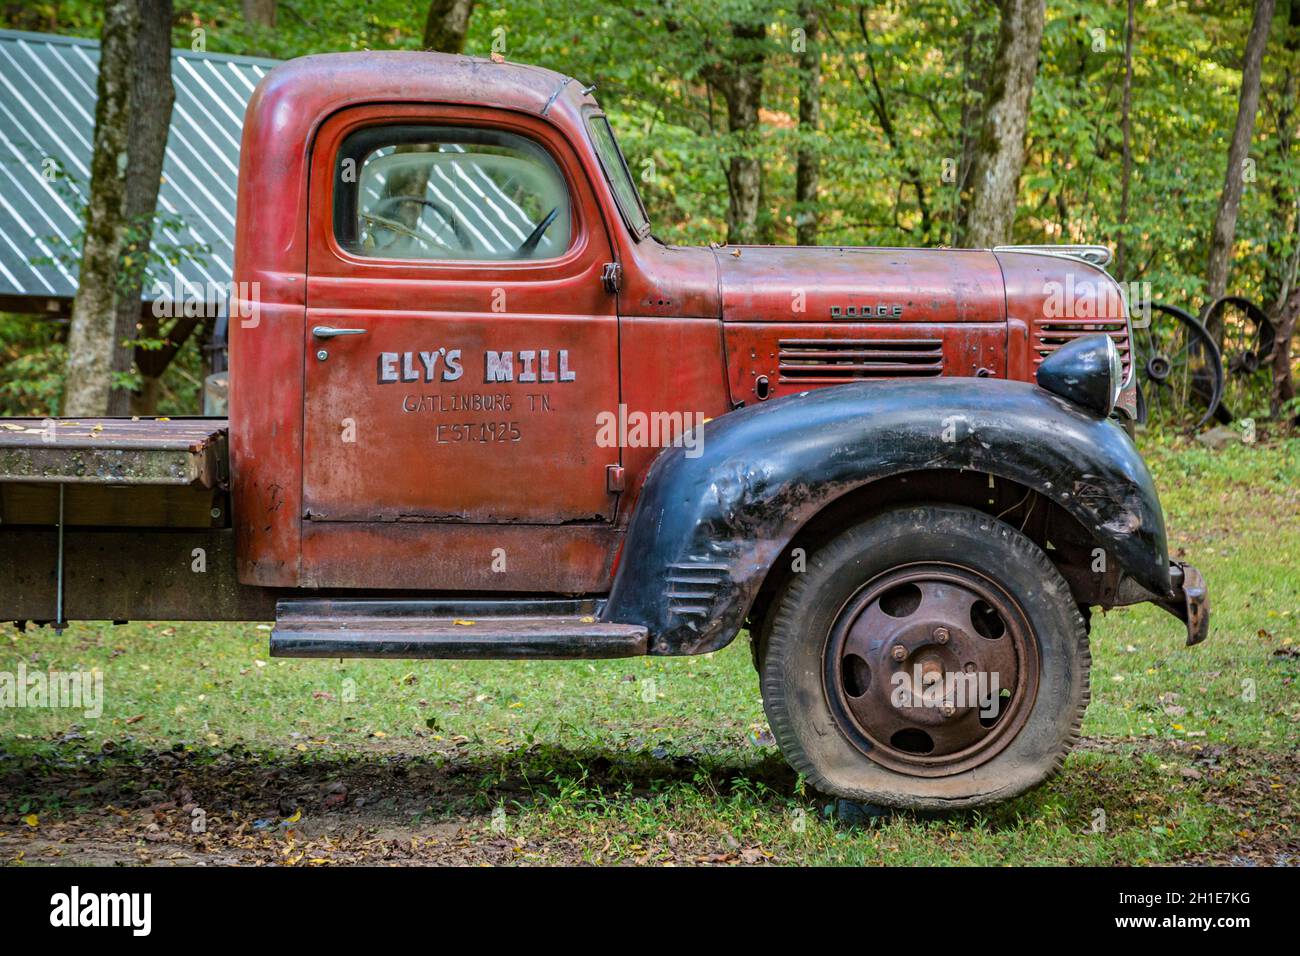 Dodge flatbed truck from the 30s at Ely's Mill along the Roaring Fork Motor Nature Trail in the Great Smoky Mountains National Park Stock Photo